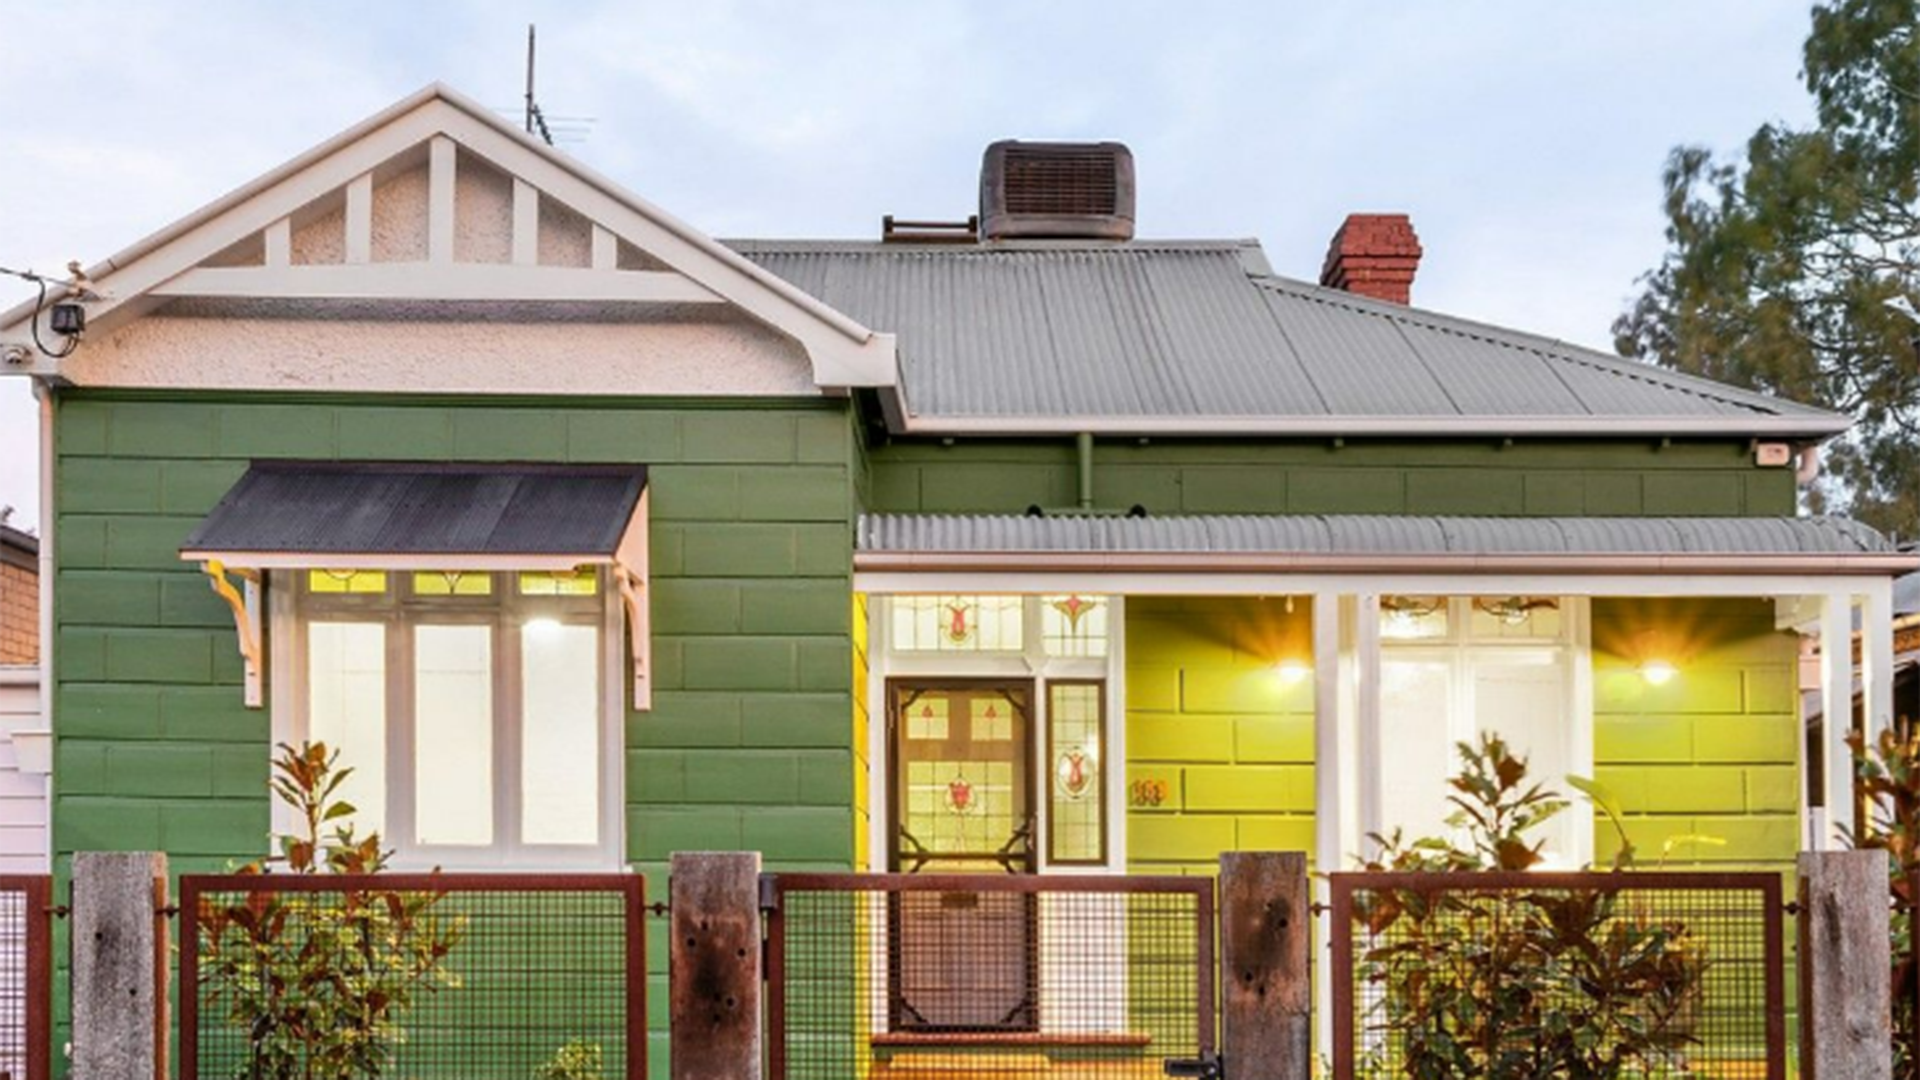 Backyard putting green is on offer at this $2.6m Melbourne terrace house